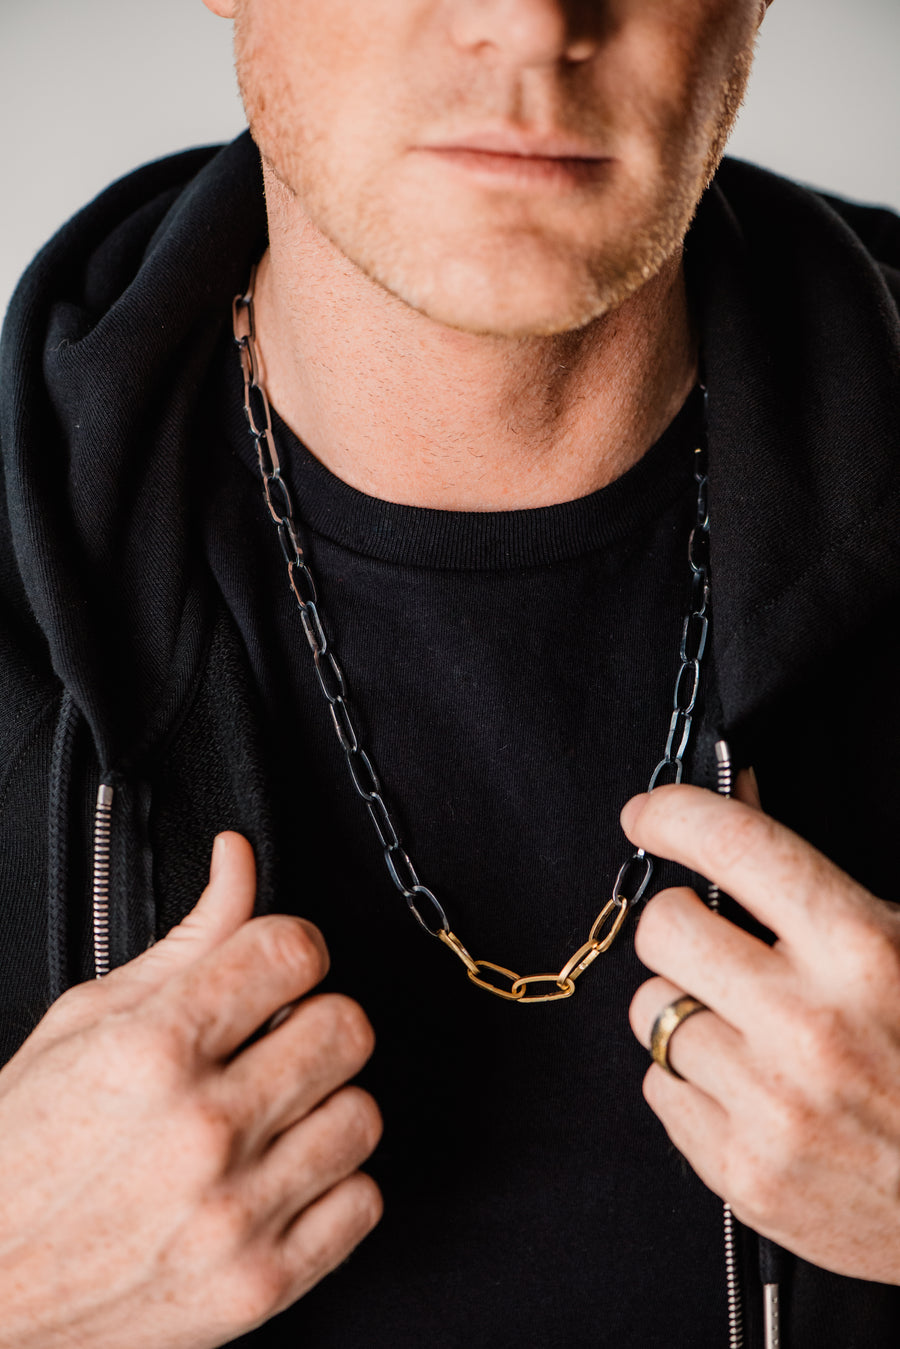 Heavyweight Black + Gold Chain Necklace - 22k/18k Gold Chain - KMJ Dusted 22k/18k Gold